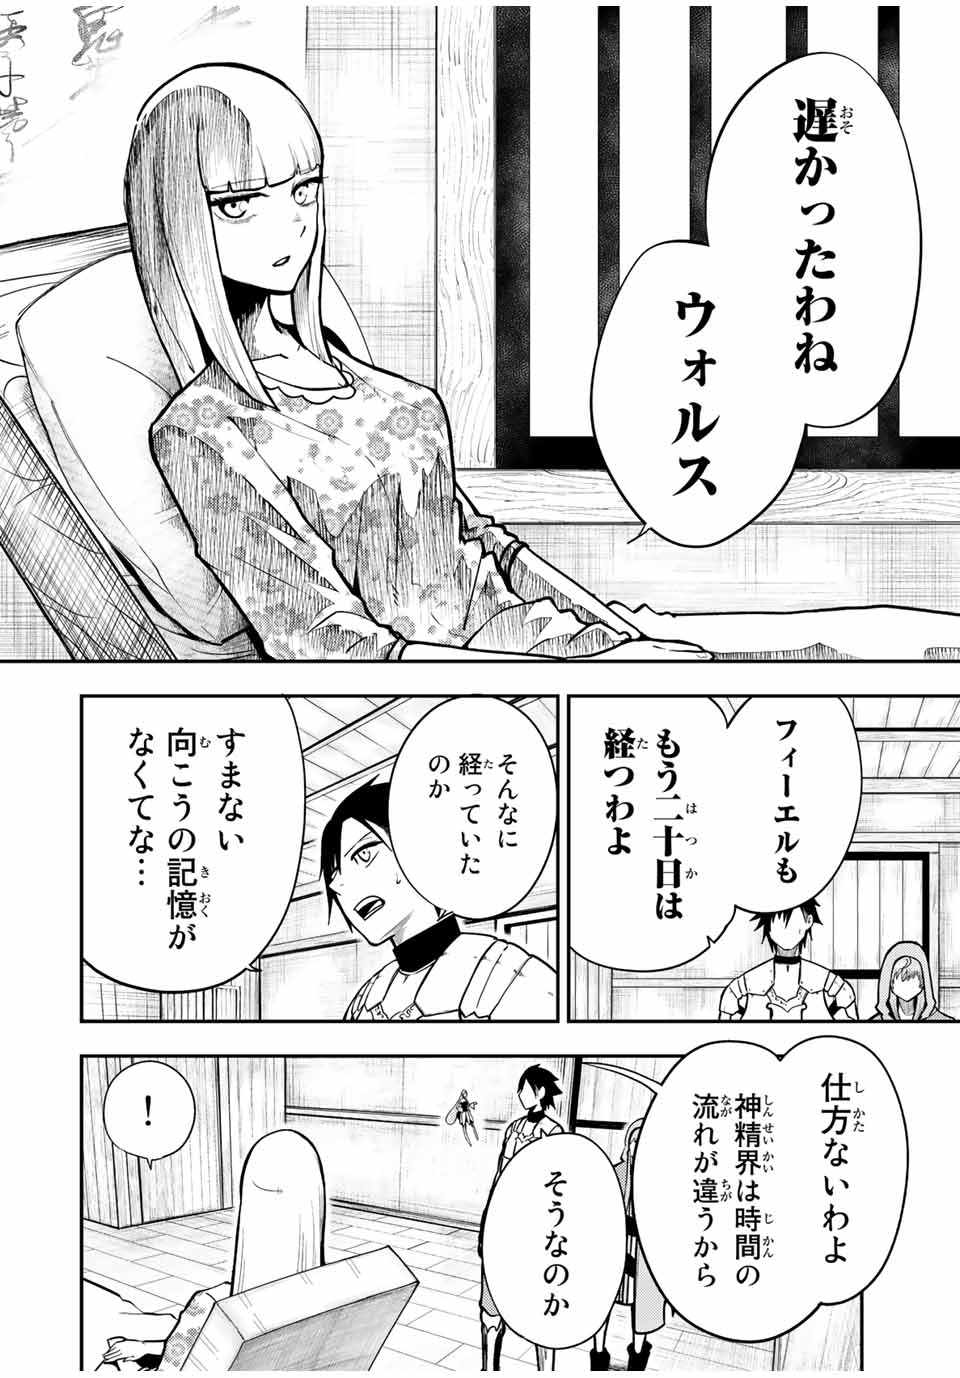 the strongest former prince-; 奴隷転生 ～その奴隷、最強の元王子につき～ 第78話 - Page 8